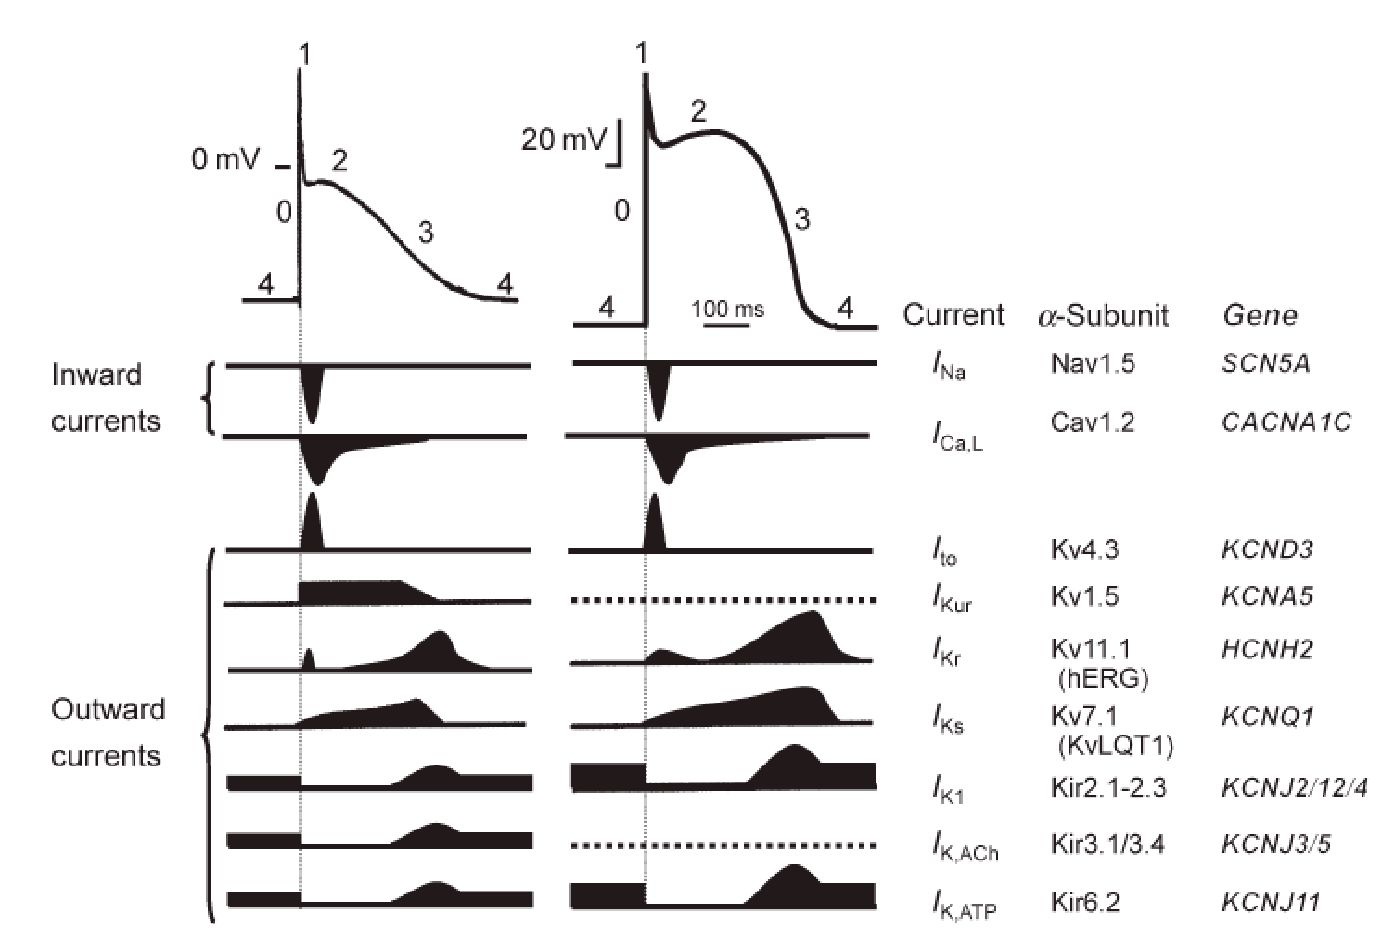 Currents of sodium, calcium and potassium channels underlie the atrial and ventricular action potential. 